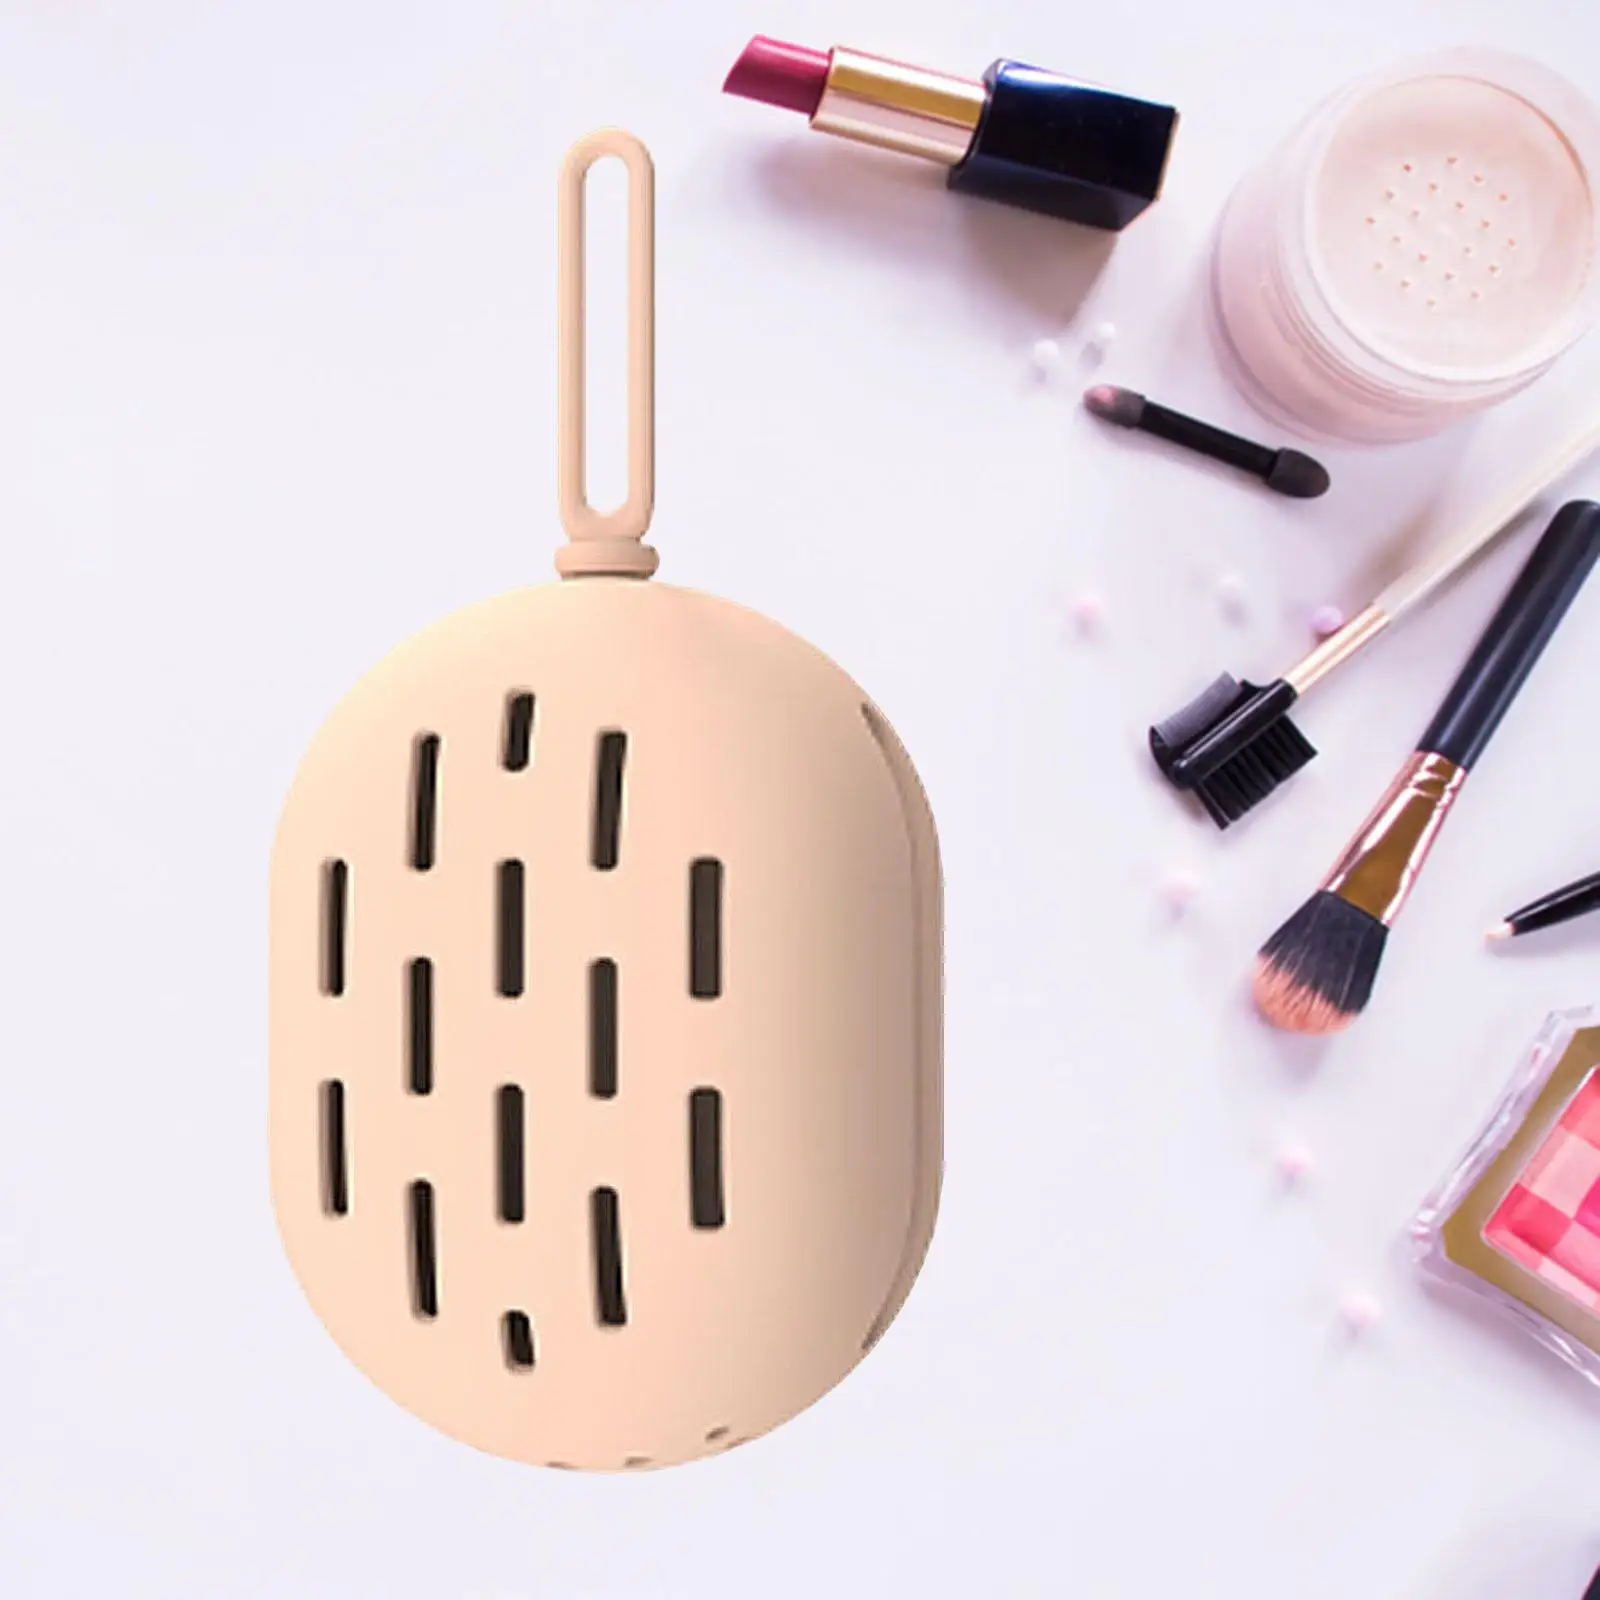 Makeup Sponge Holder Lanyard Design Breathable Shatterproof Organizer Reusable Drying Holder Puff Container for Cosmetics